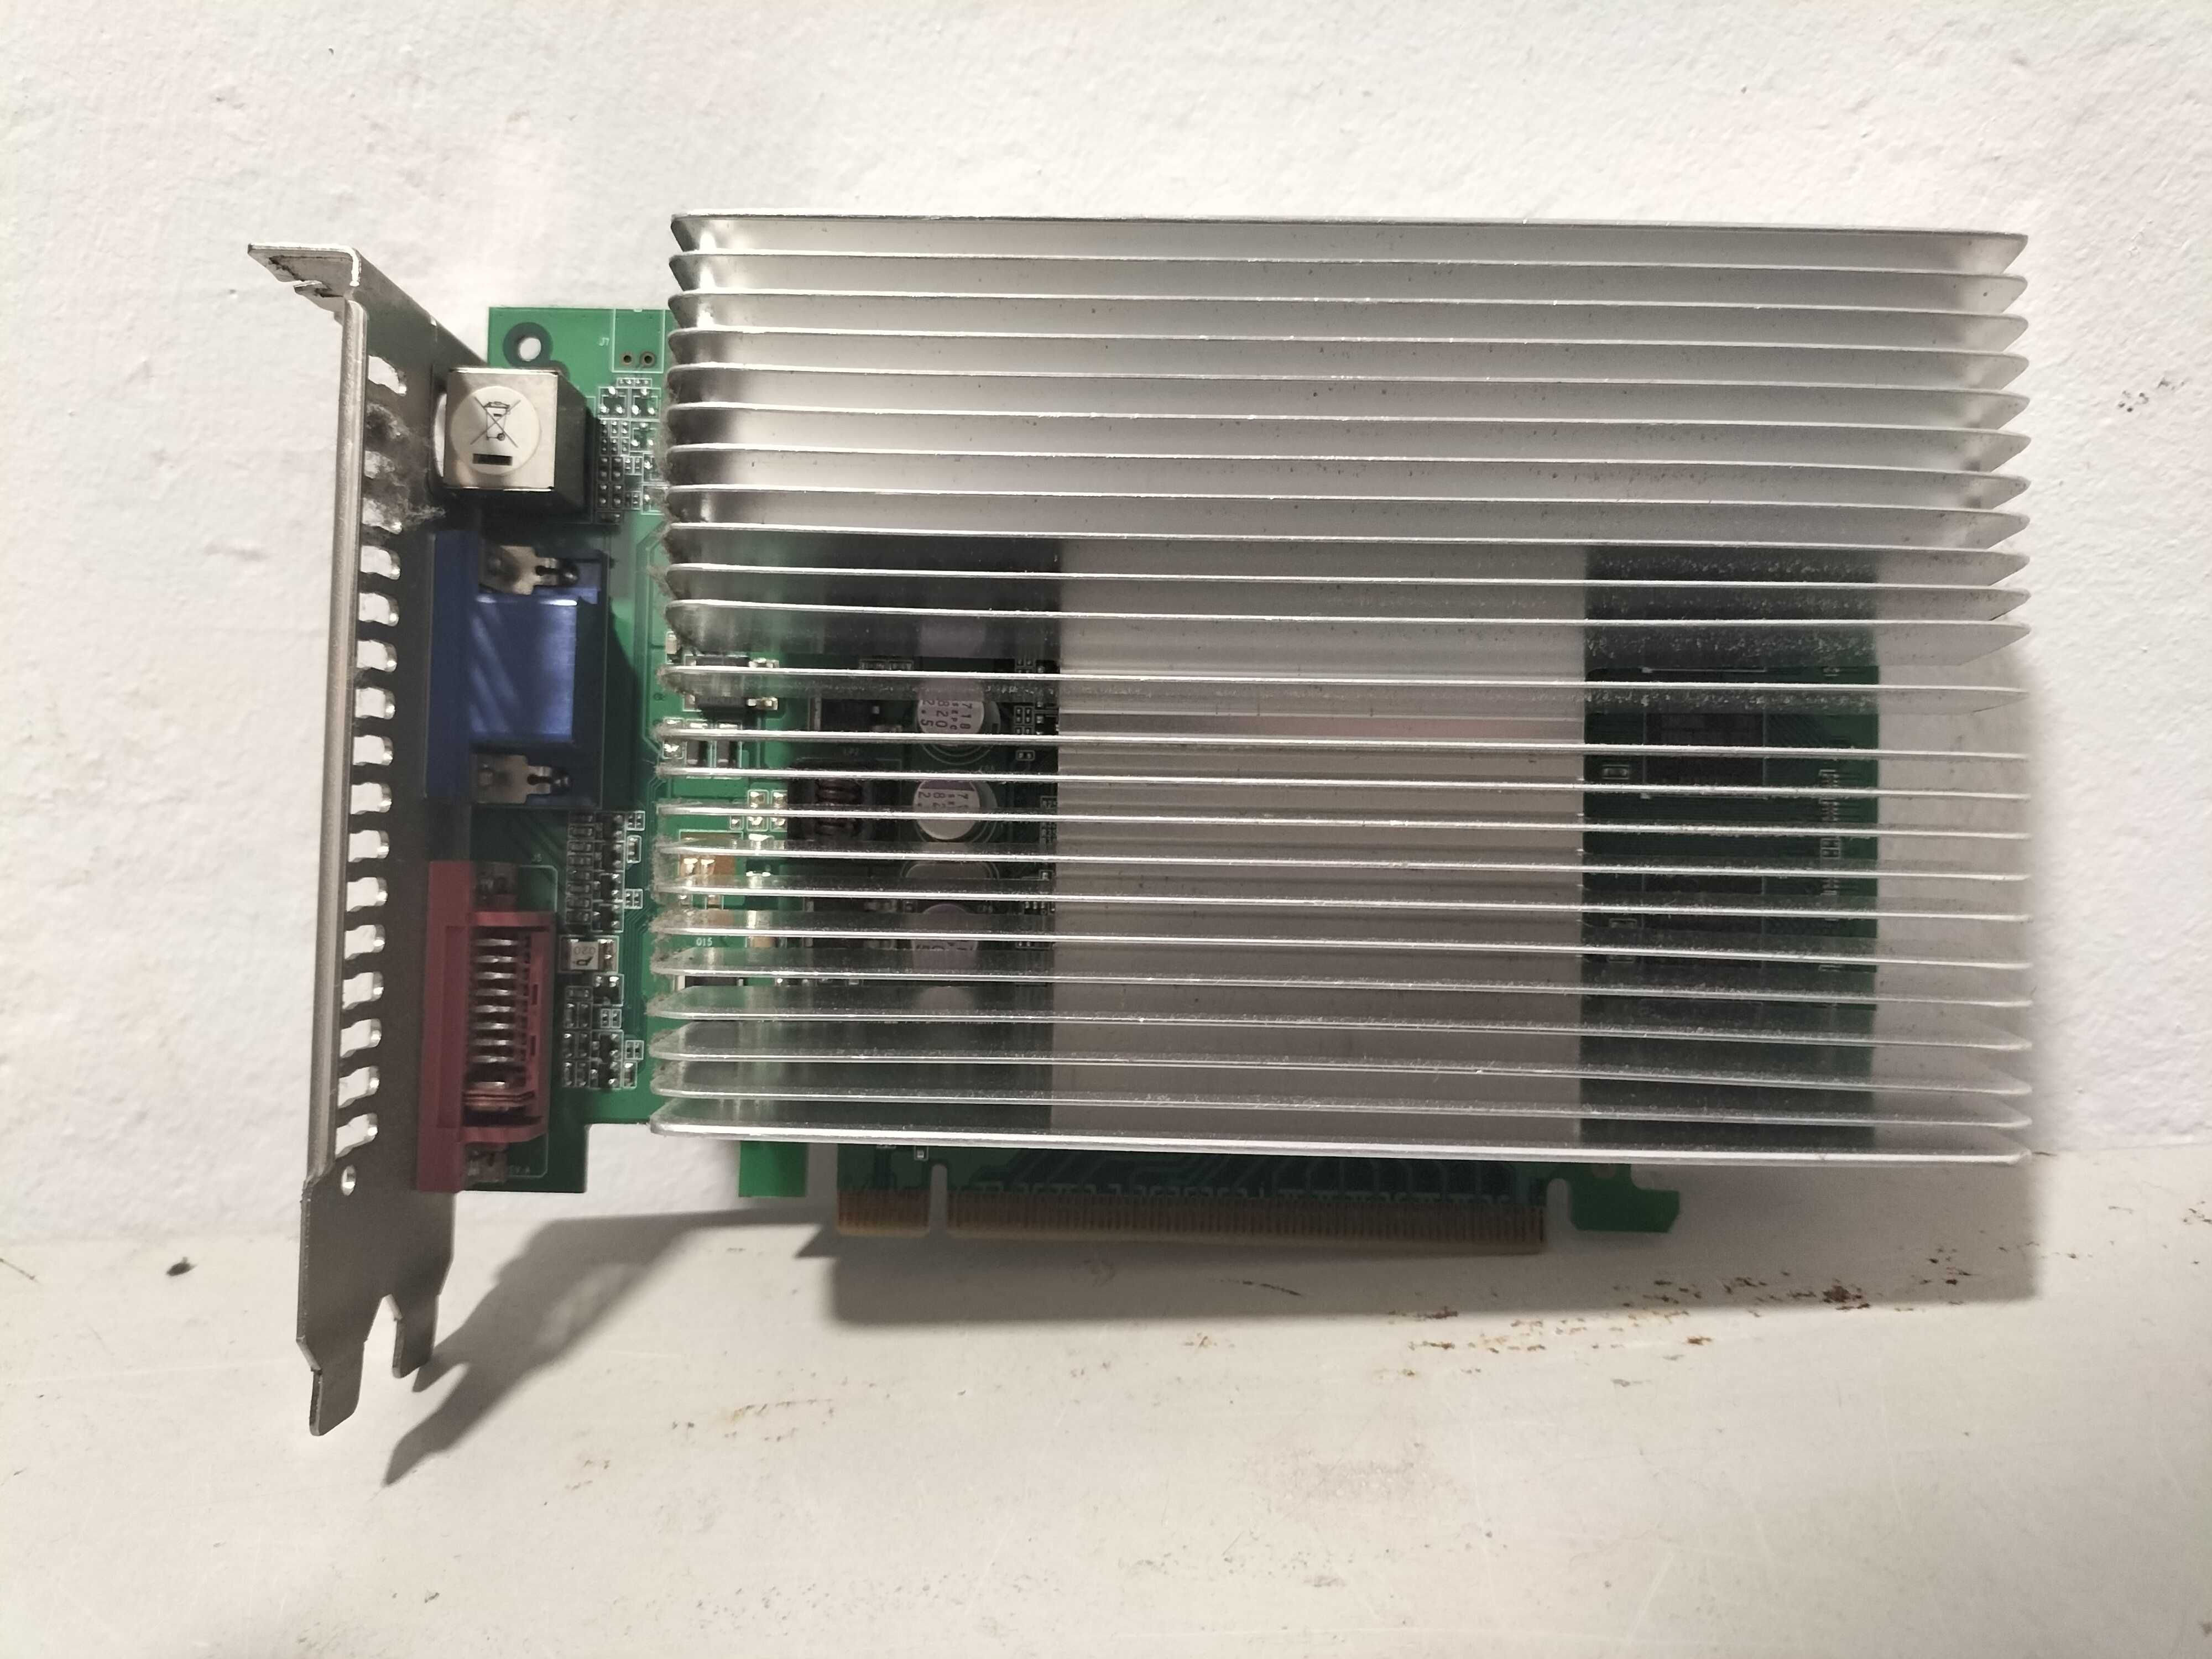 GeForce 8500GT PCI-E 256MB DDR2 TV-OUT DVI